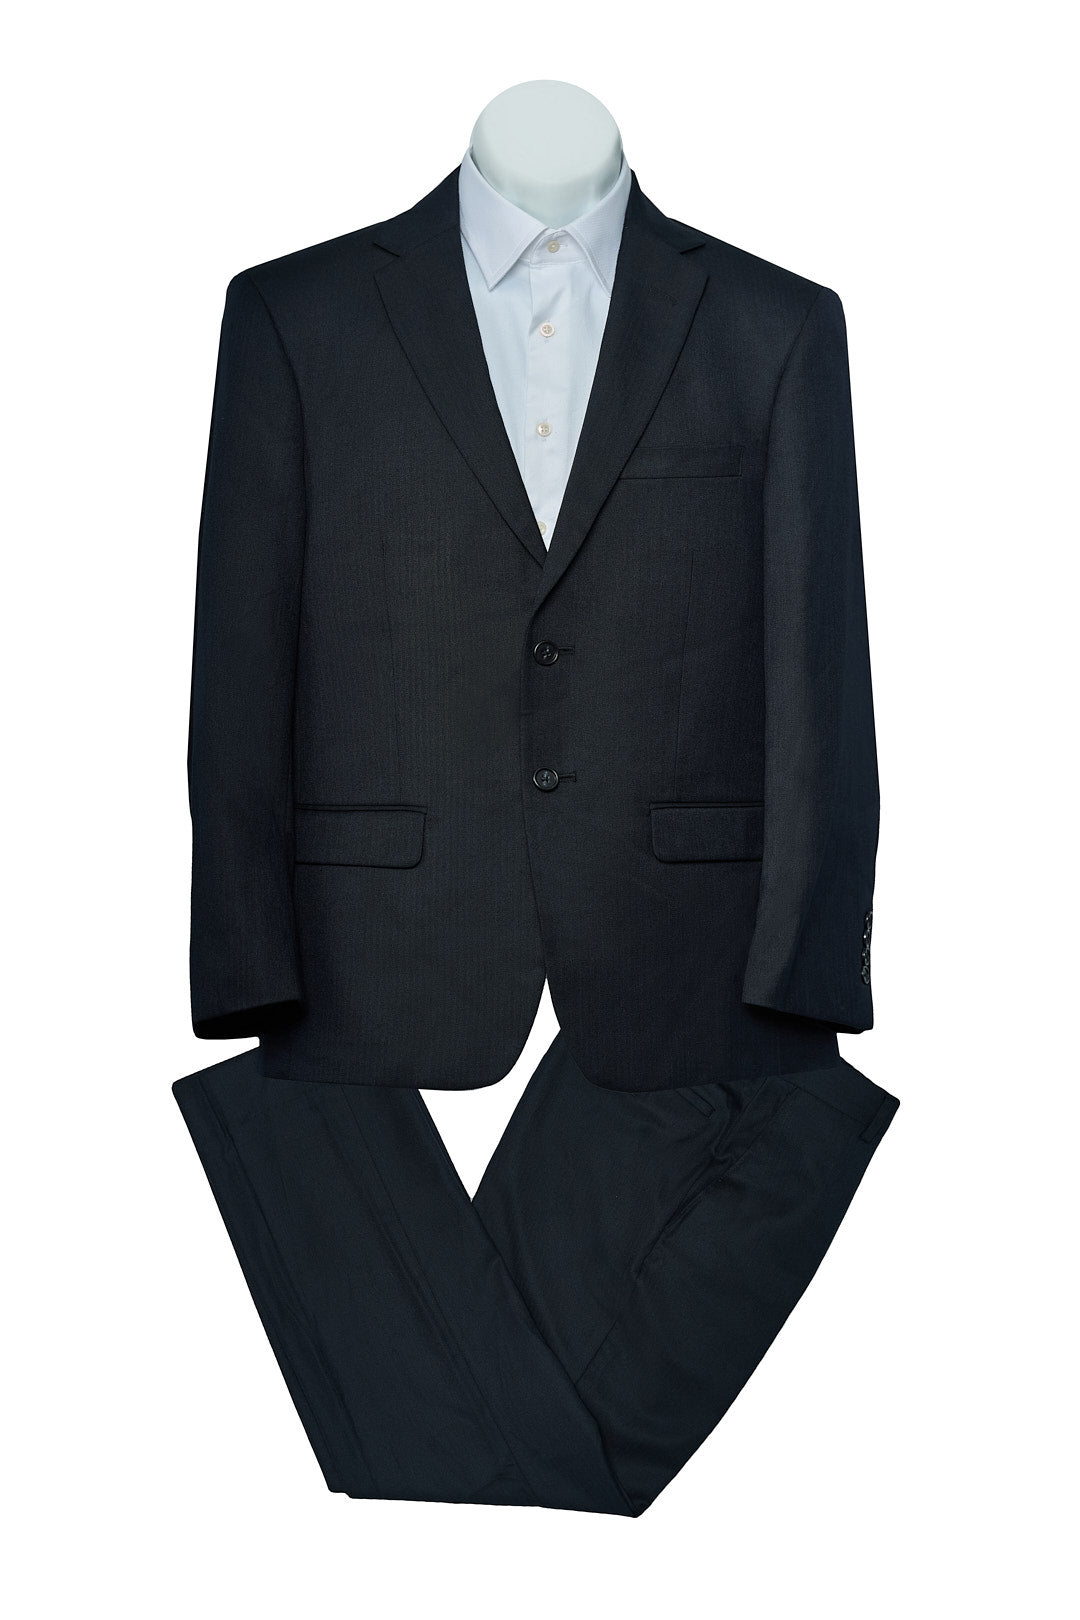 "The Classic One" Wool Suit